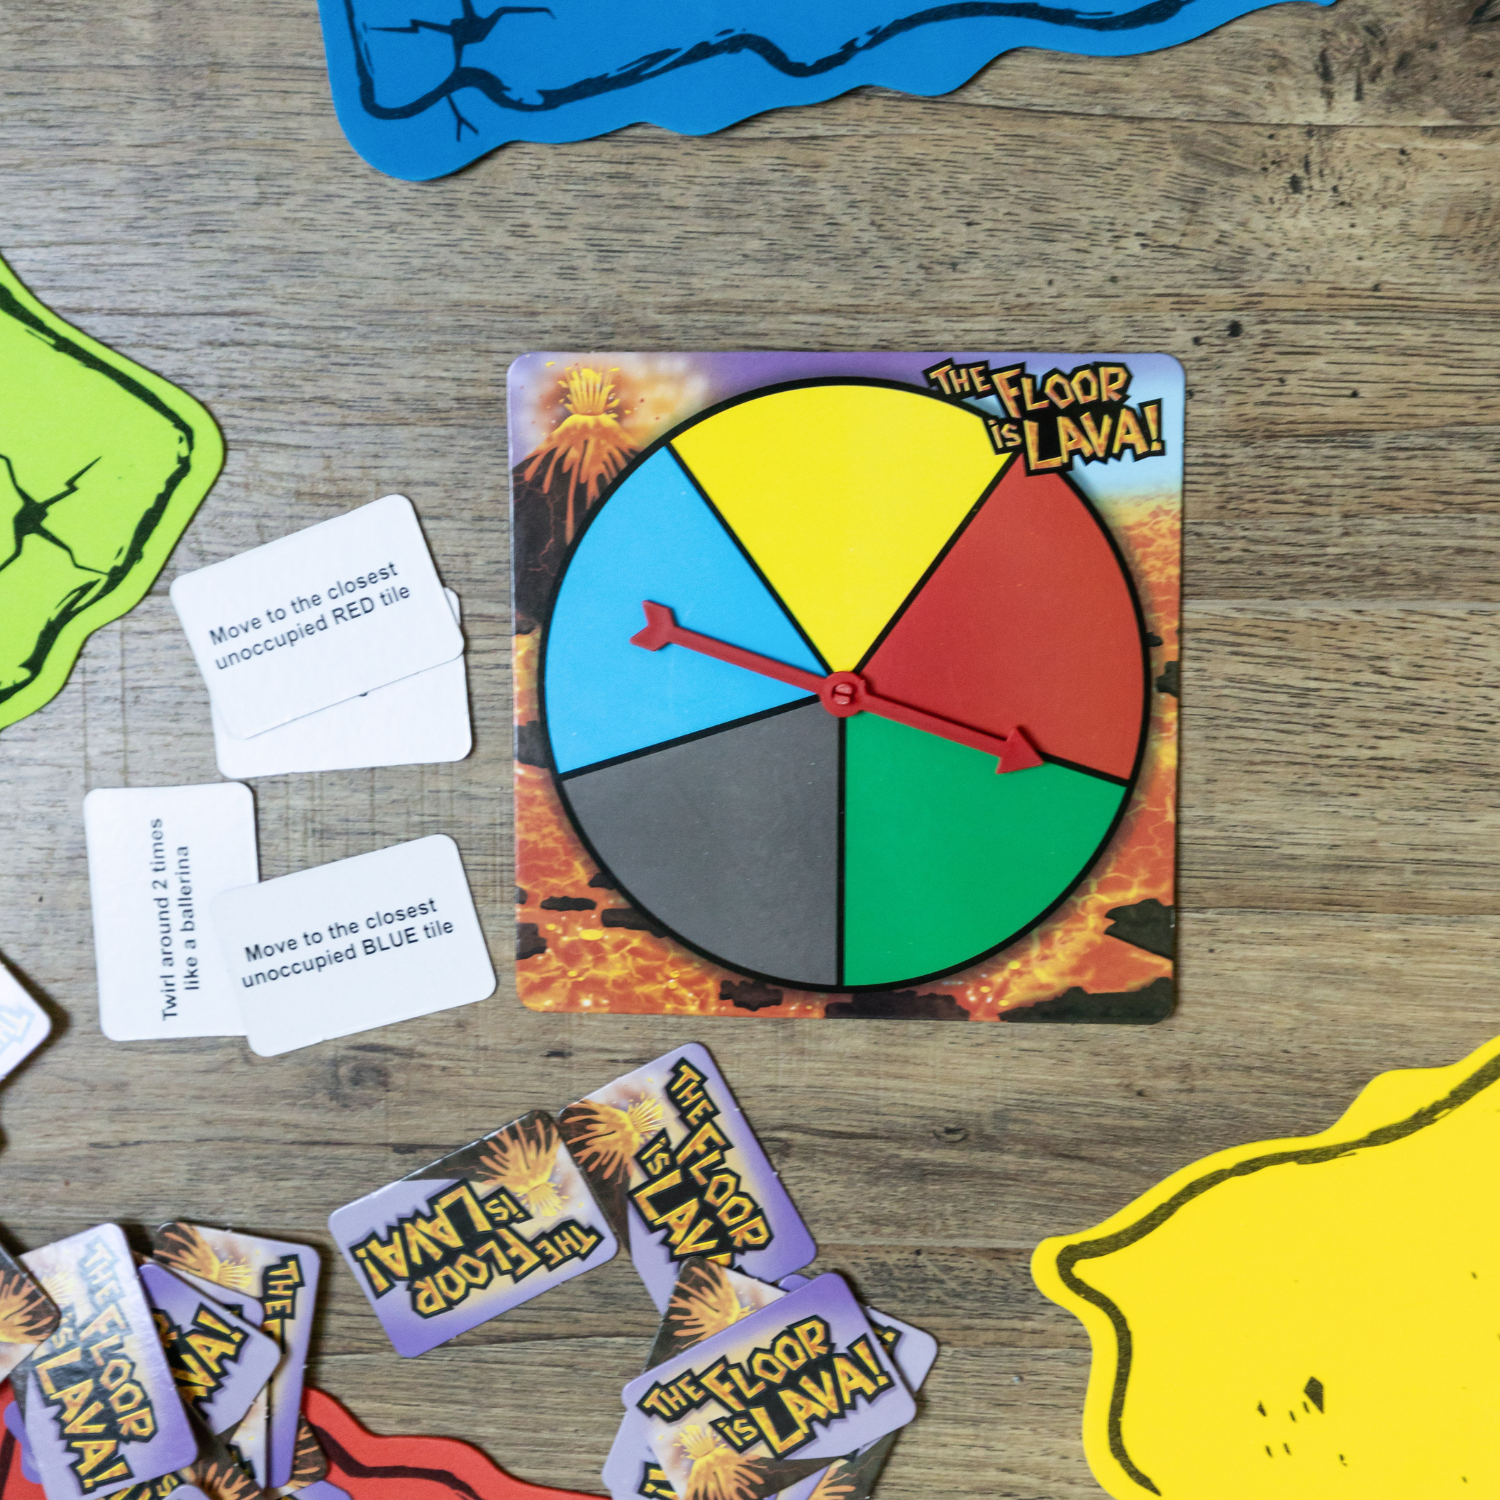 A multi-colored wheel spinner is in the center of the image next to a pile of cards. The spinner has an image of a volcano in the background and says The Floor is Lava.